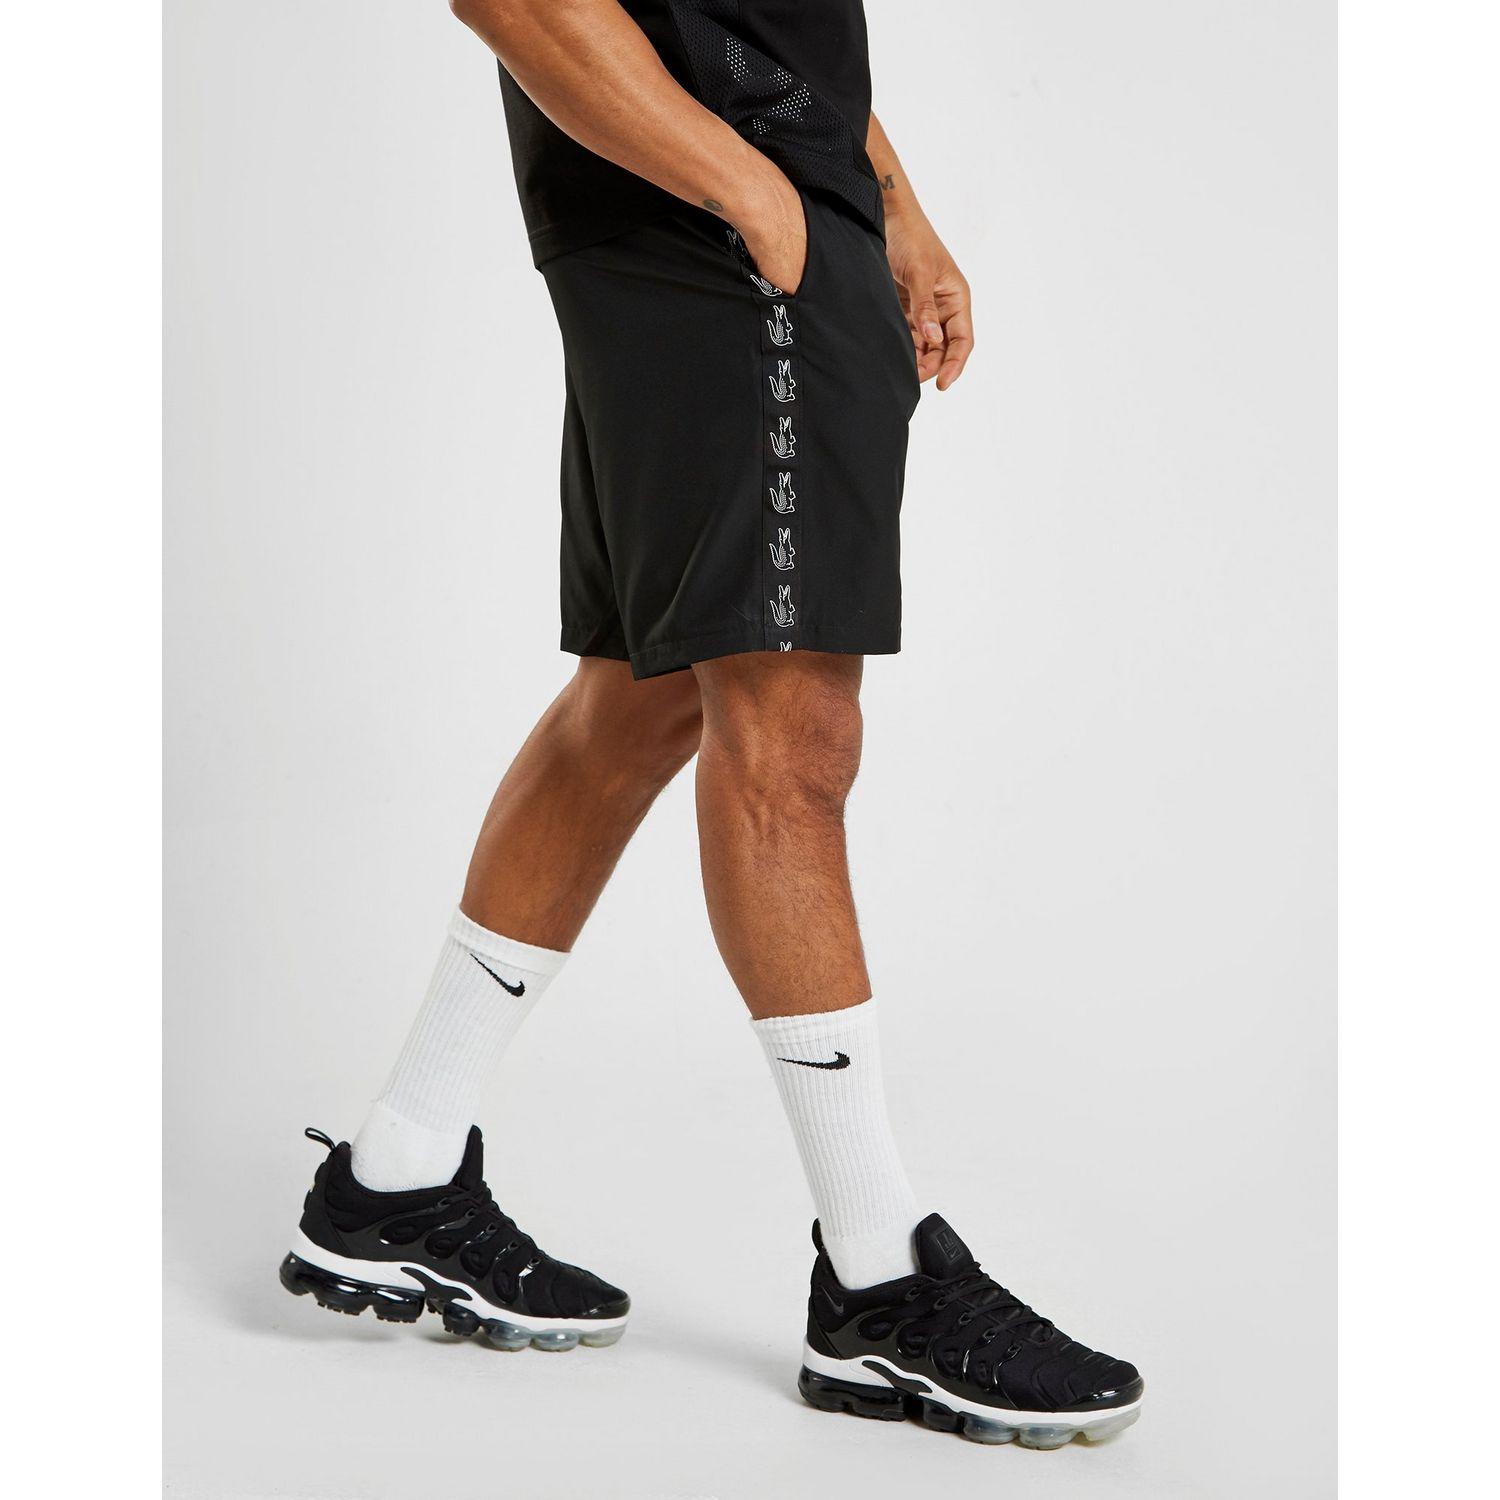 Lacoste Synthetic Tape Shorts in Black 